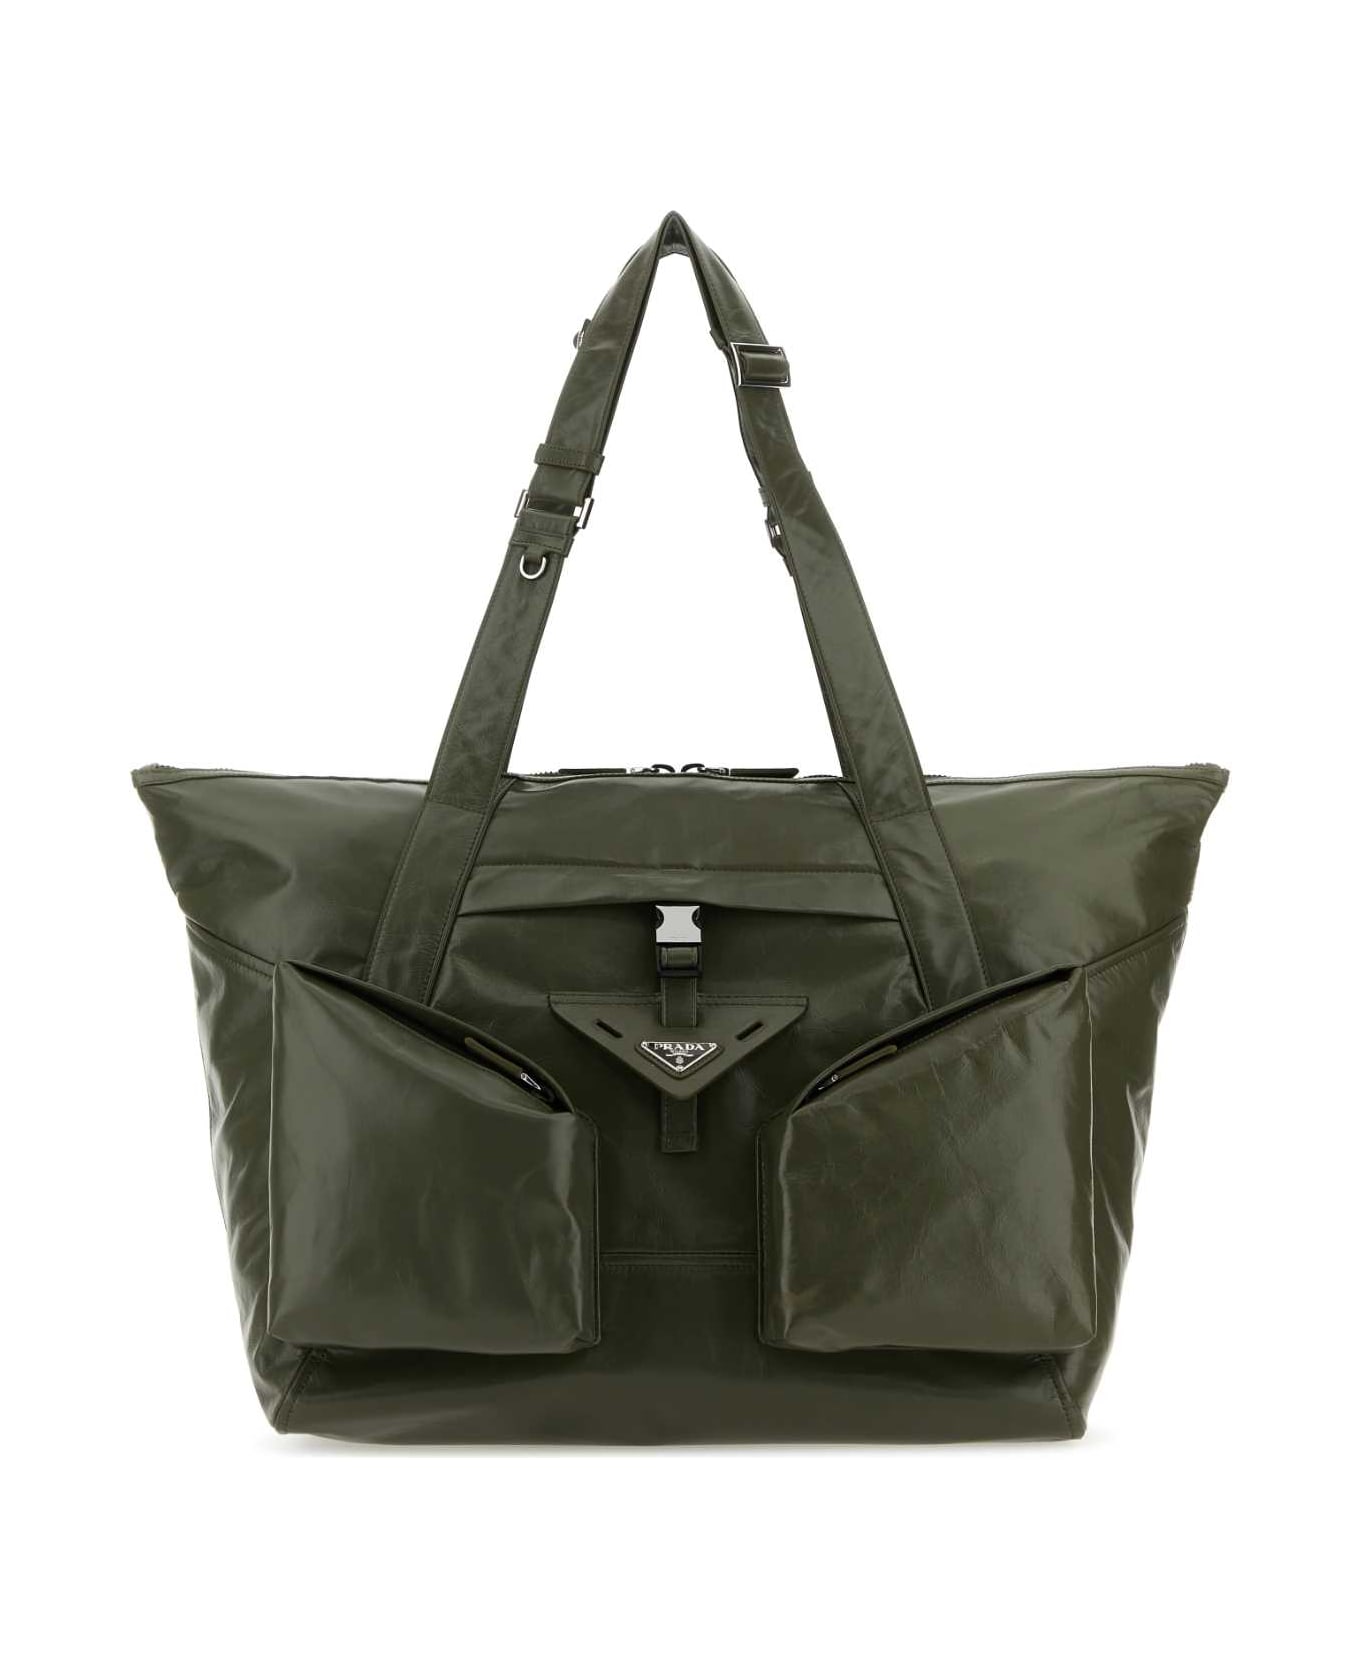 Prada Olive Green Leather Shopping Bag - LODEN トートバッグ